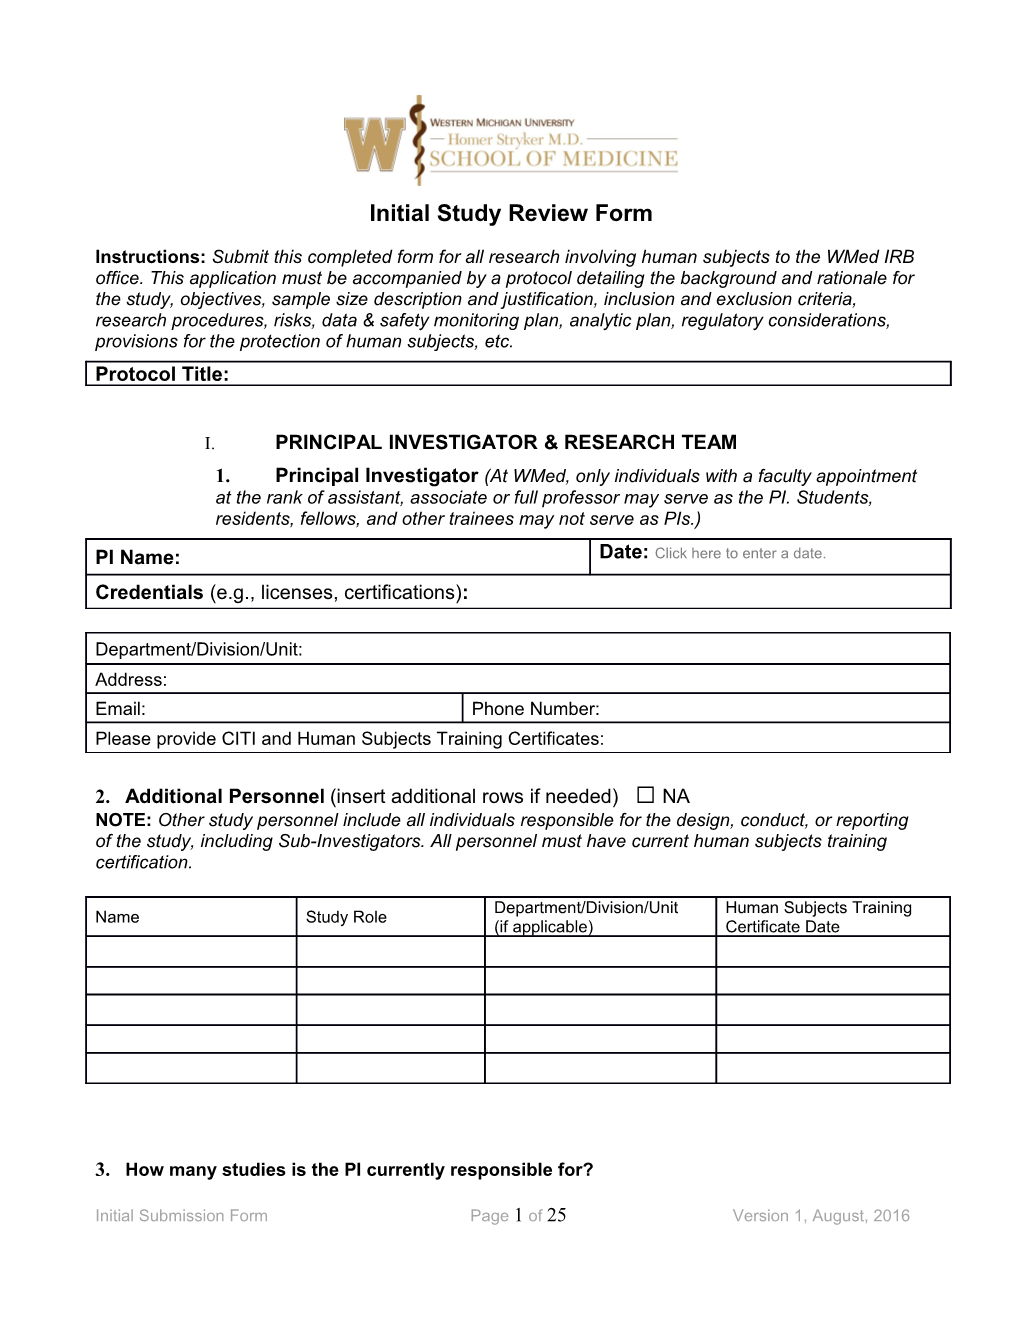 Initial Study Review Form